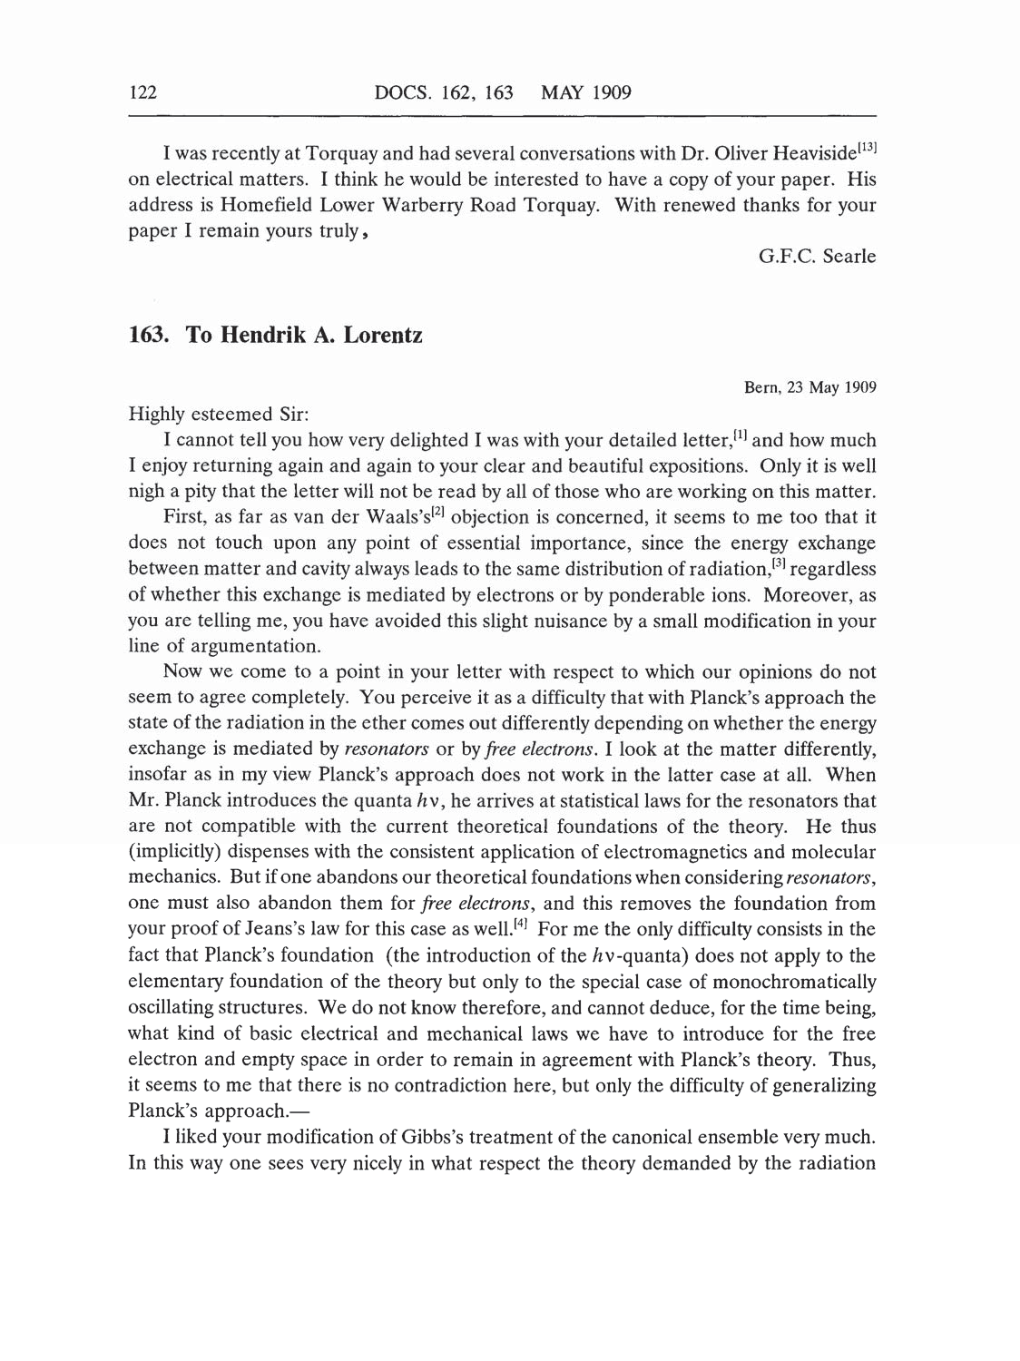 Volume 5: The Swiss Years: Correspondence, 1902-1914 (English translation supplement) page 122